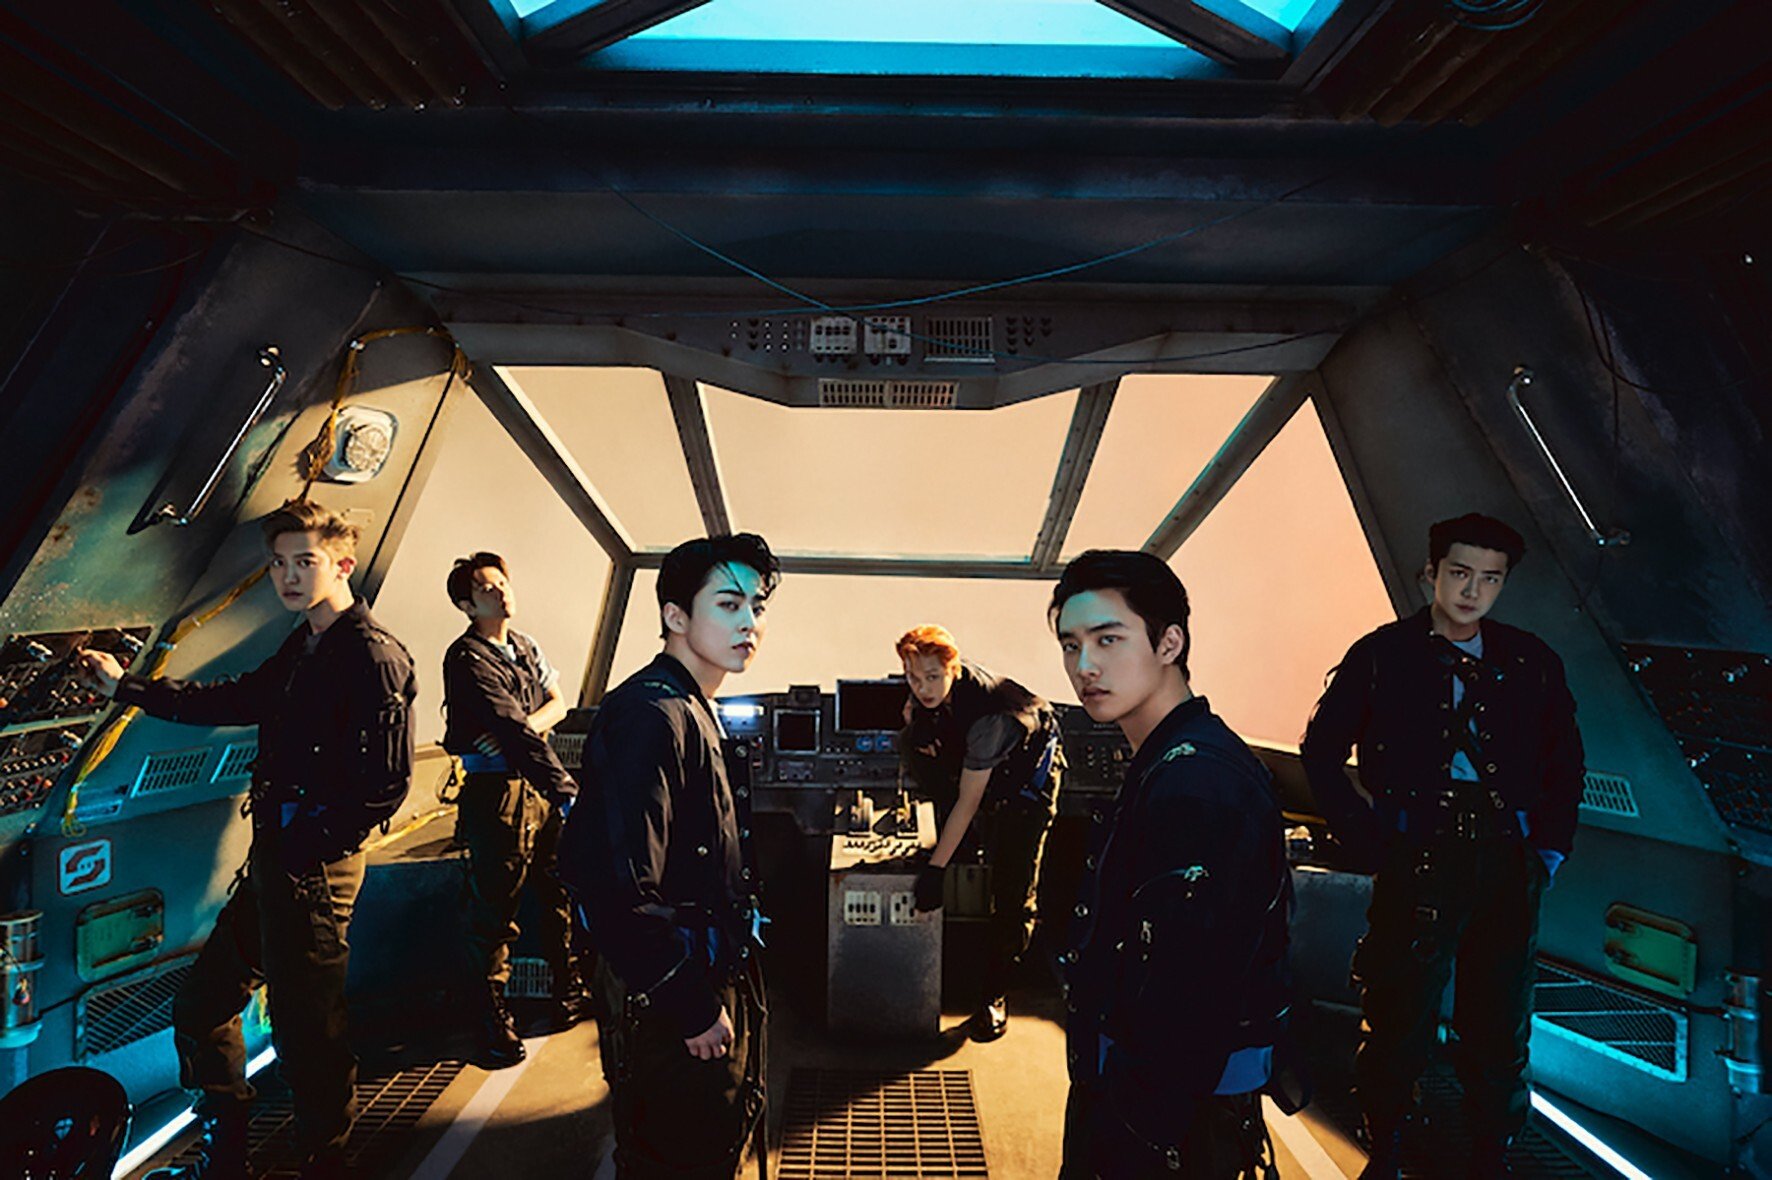 Exo released their new album “Don’t Fight The Feeling” on Monday.